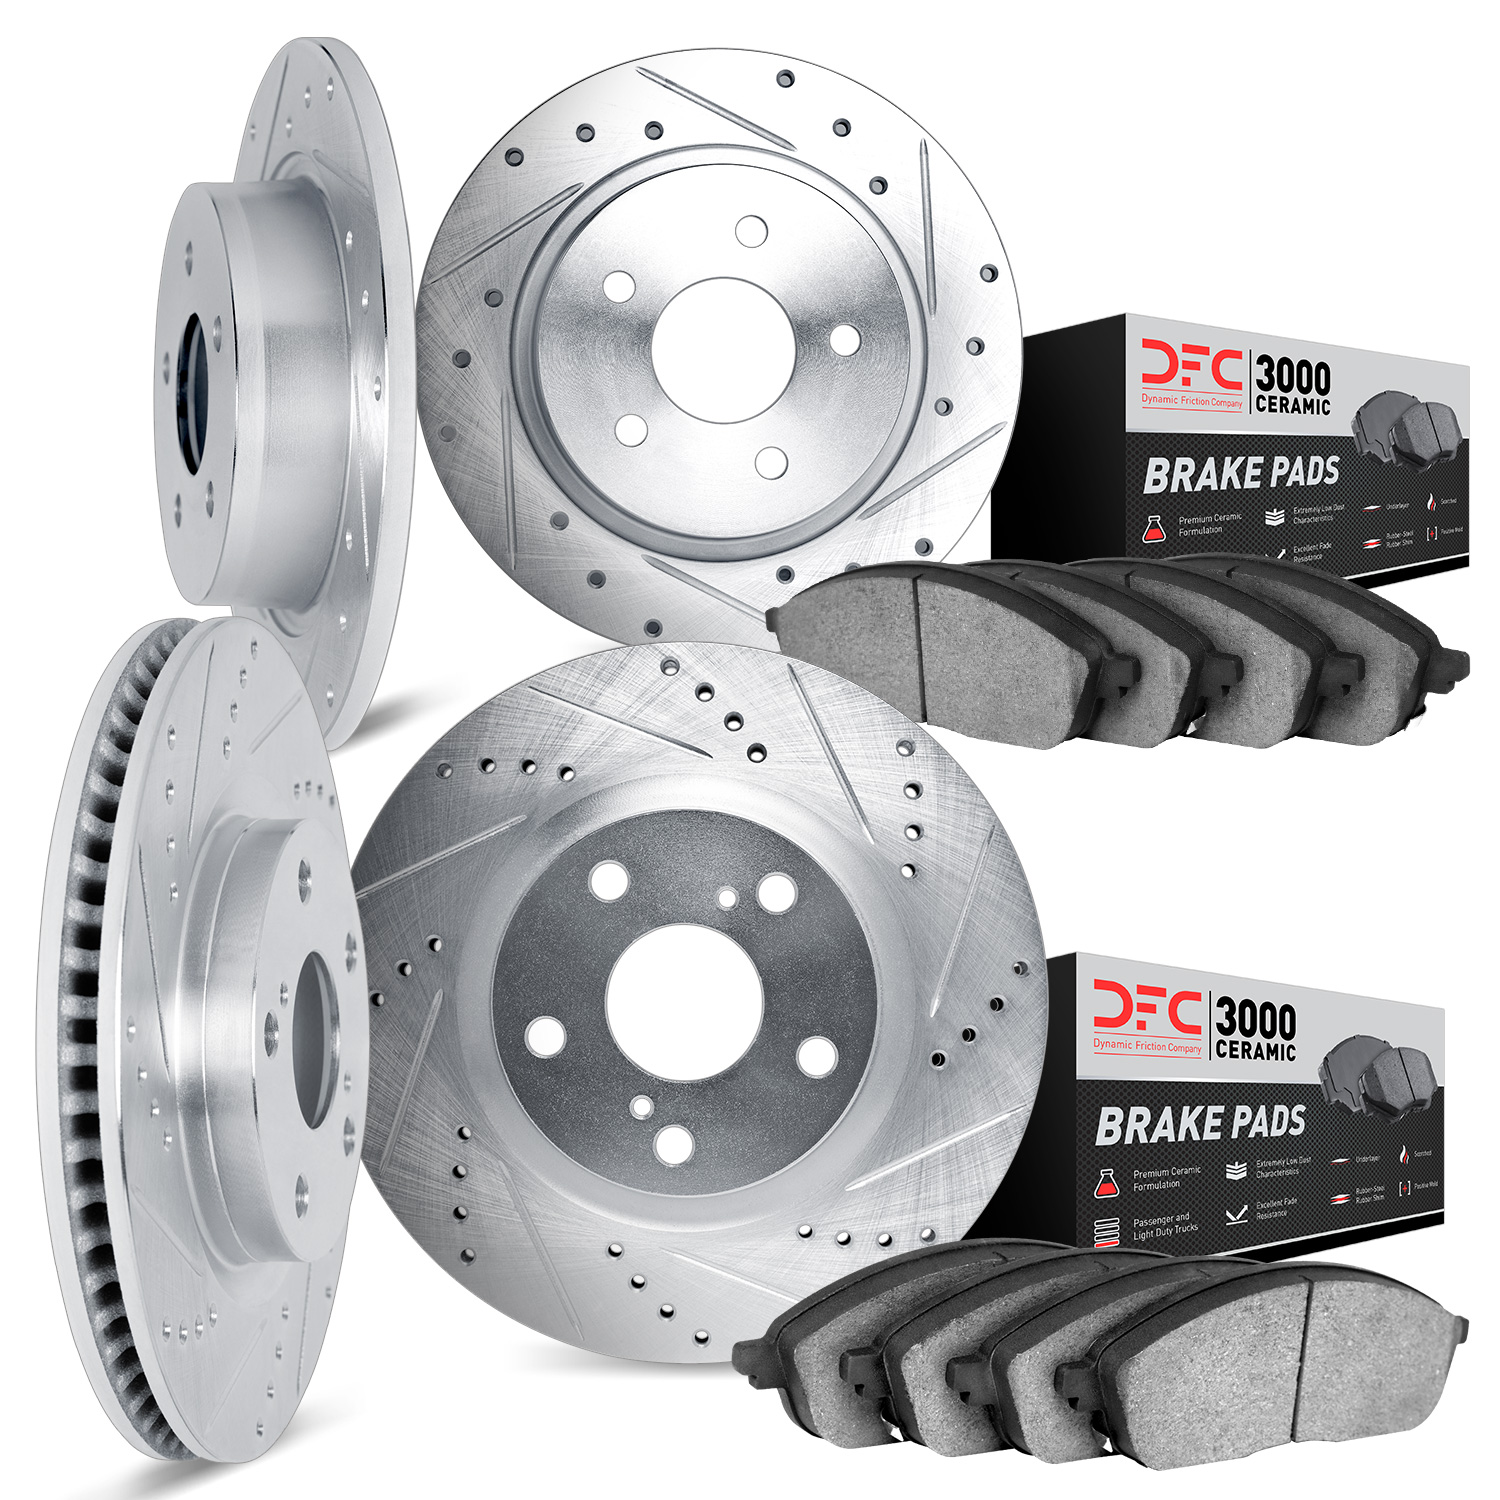 7304-54013 Drilled/Slotted Brake Rotor with 3000-Series Ceramic Brake Pads Kit [Silver], 1993-1993 Ford/Lincoln/Mercury/Mazda, P